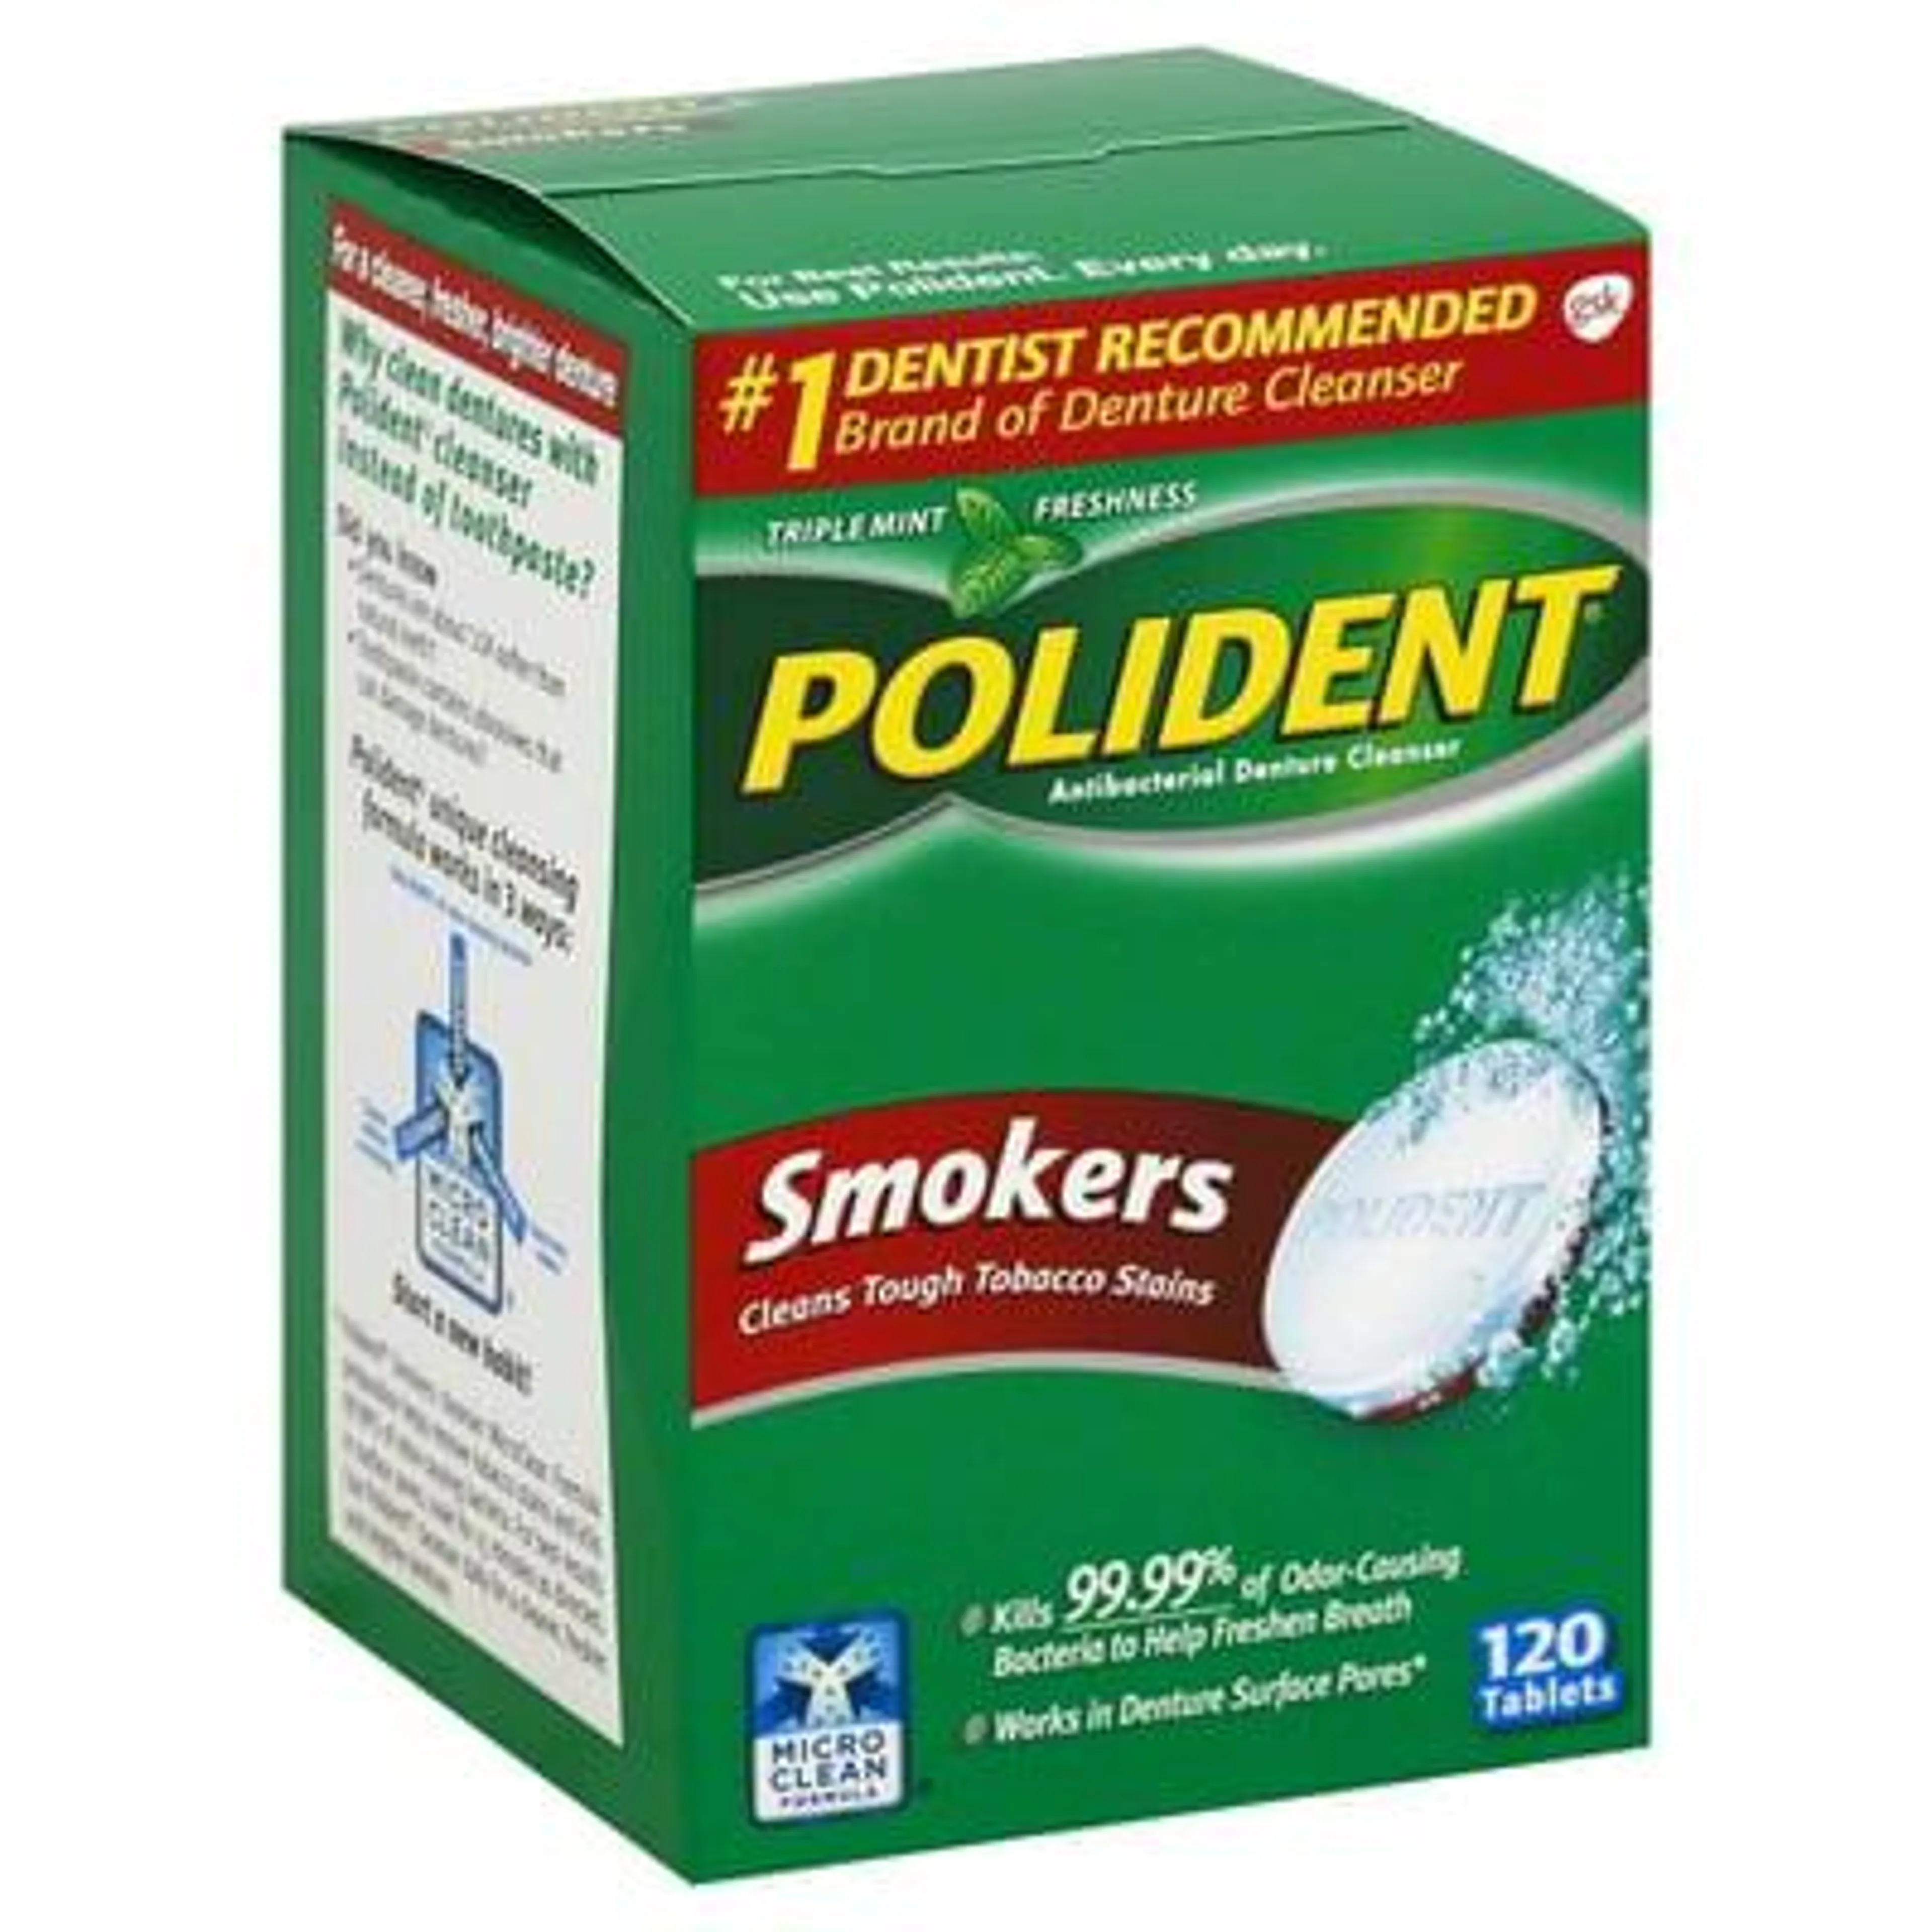 Polident, Antibacterial Denture Cleanser, Triple Mint Freshness, Smokers, Tablets